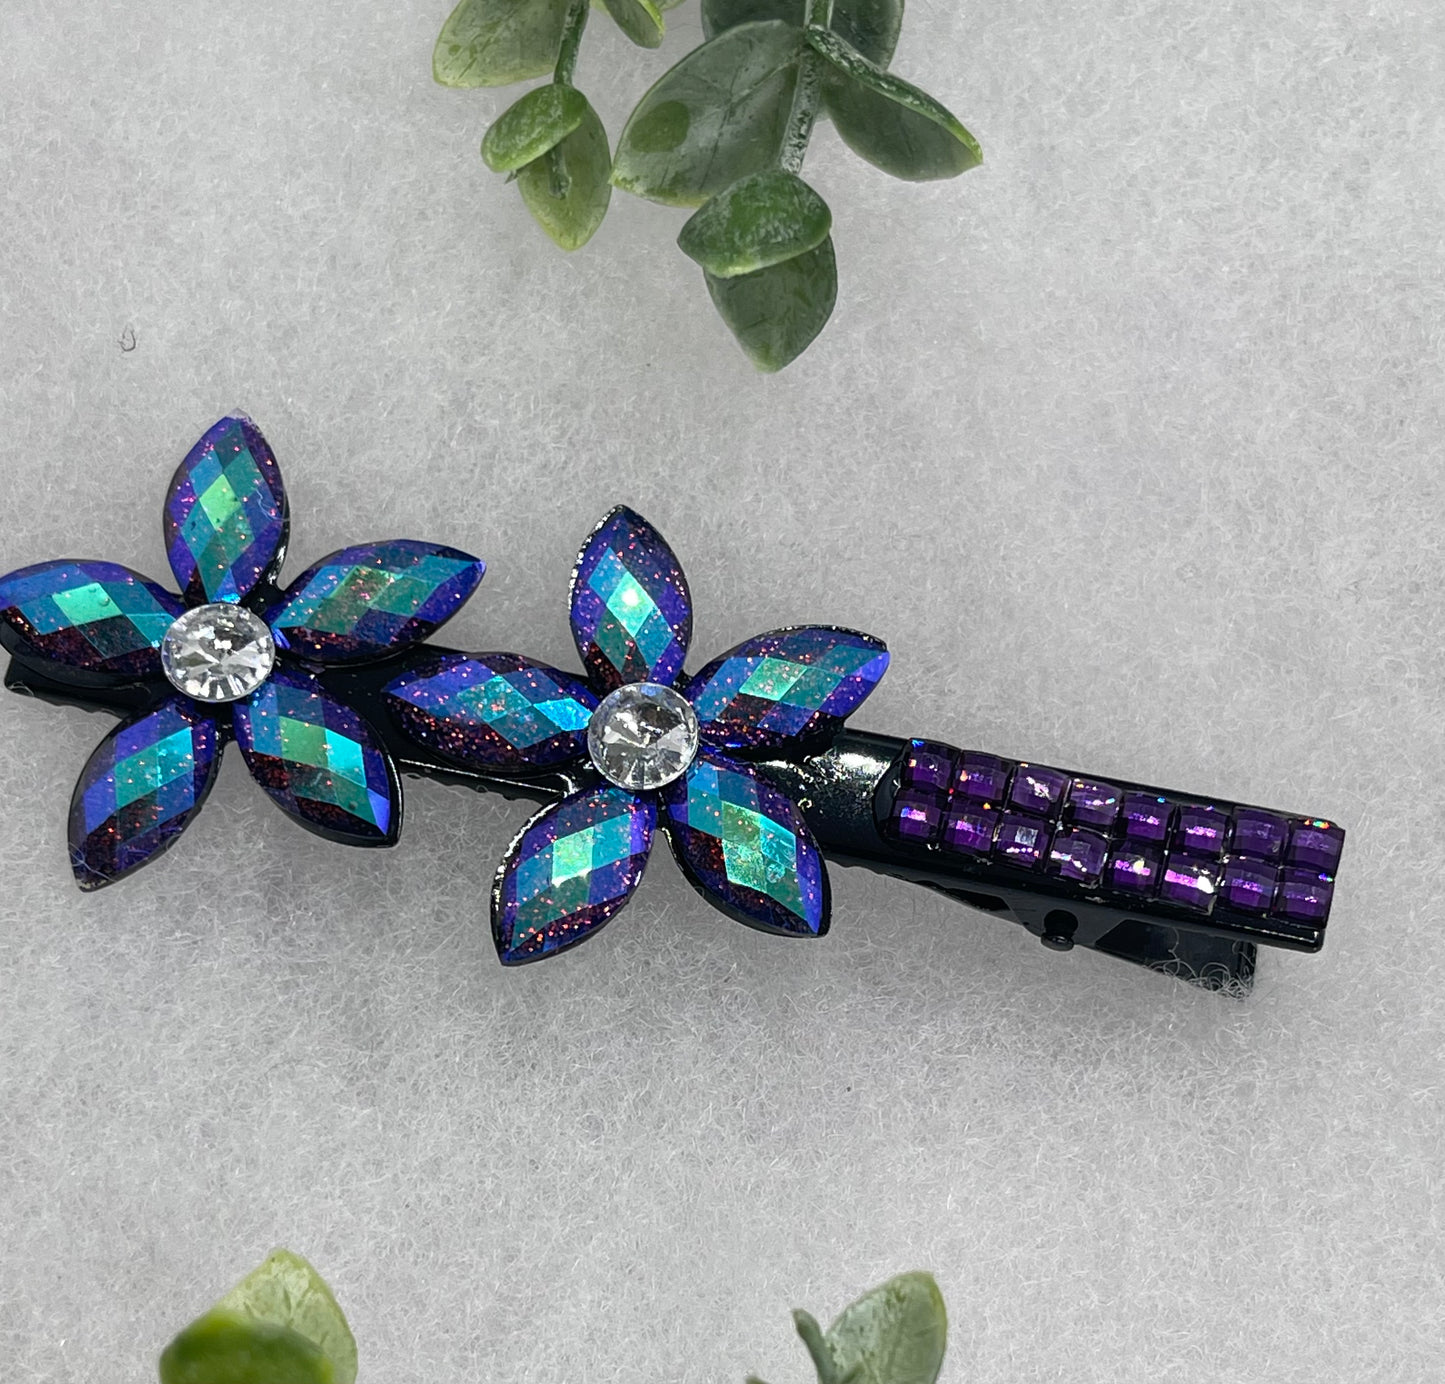 Blue Iridescent Crystal flower hair clip approximately 4.0” black tone formal hair accessory gift wedding bridal engagement